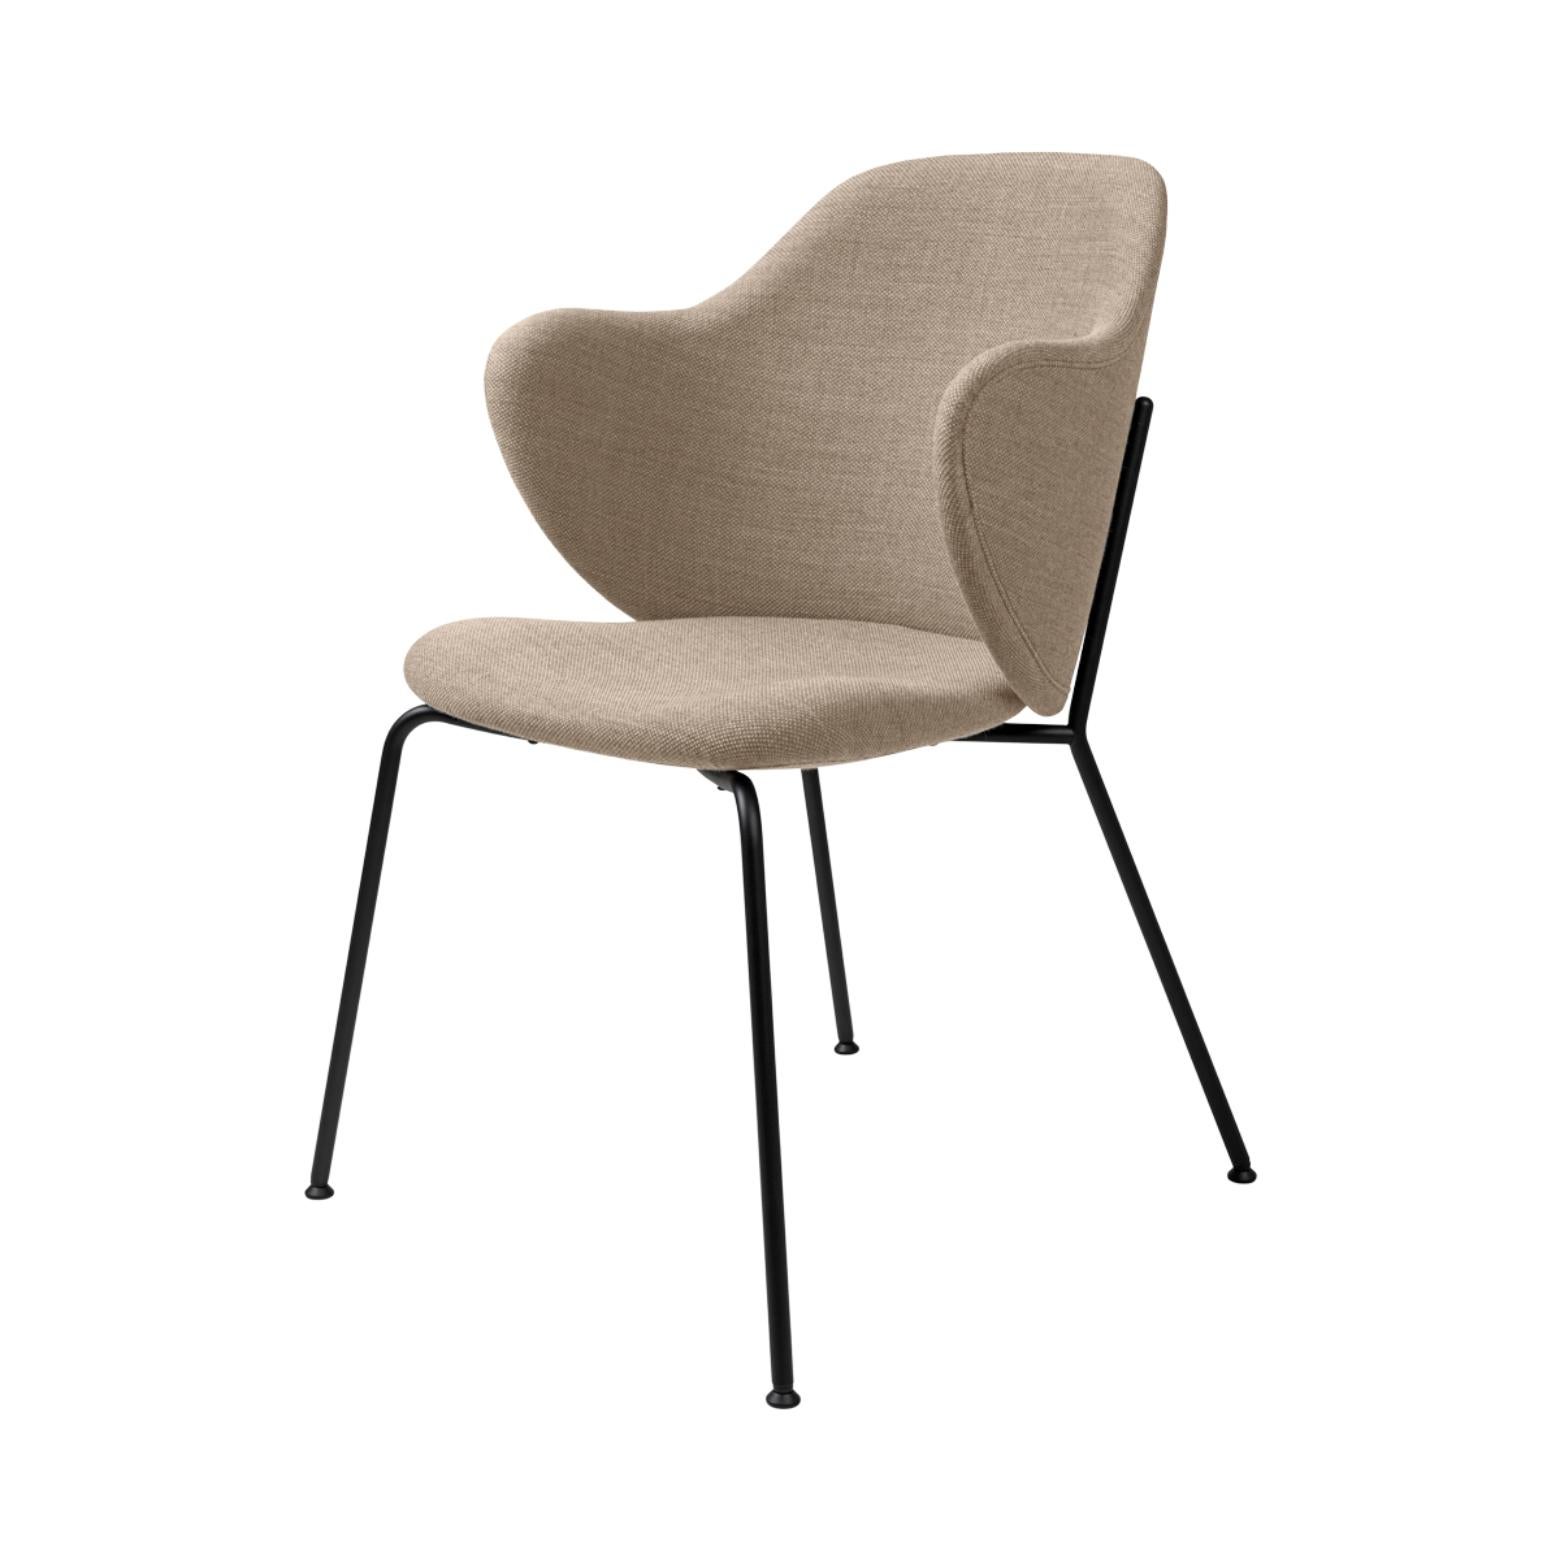 Beige Fiord lassen chair by Lassen
Dimensions: W 58 x D 60 x H 88 cm 
Materials: textile

The Lassen chair by Flemming Lassen, Magnus Sangild and Marianne Viktor was launched in 2018 as an ode to Flemming Lassen’s uncompromising approach and